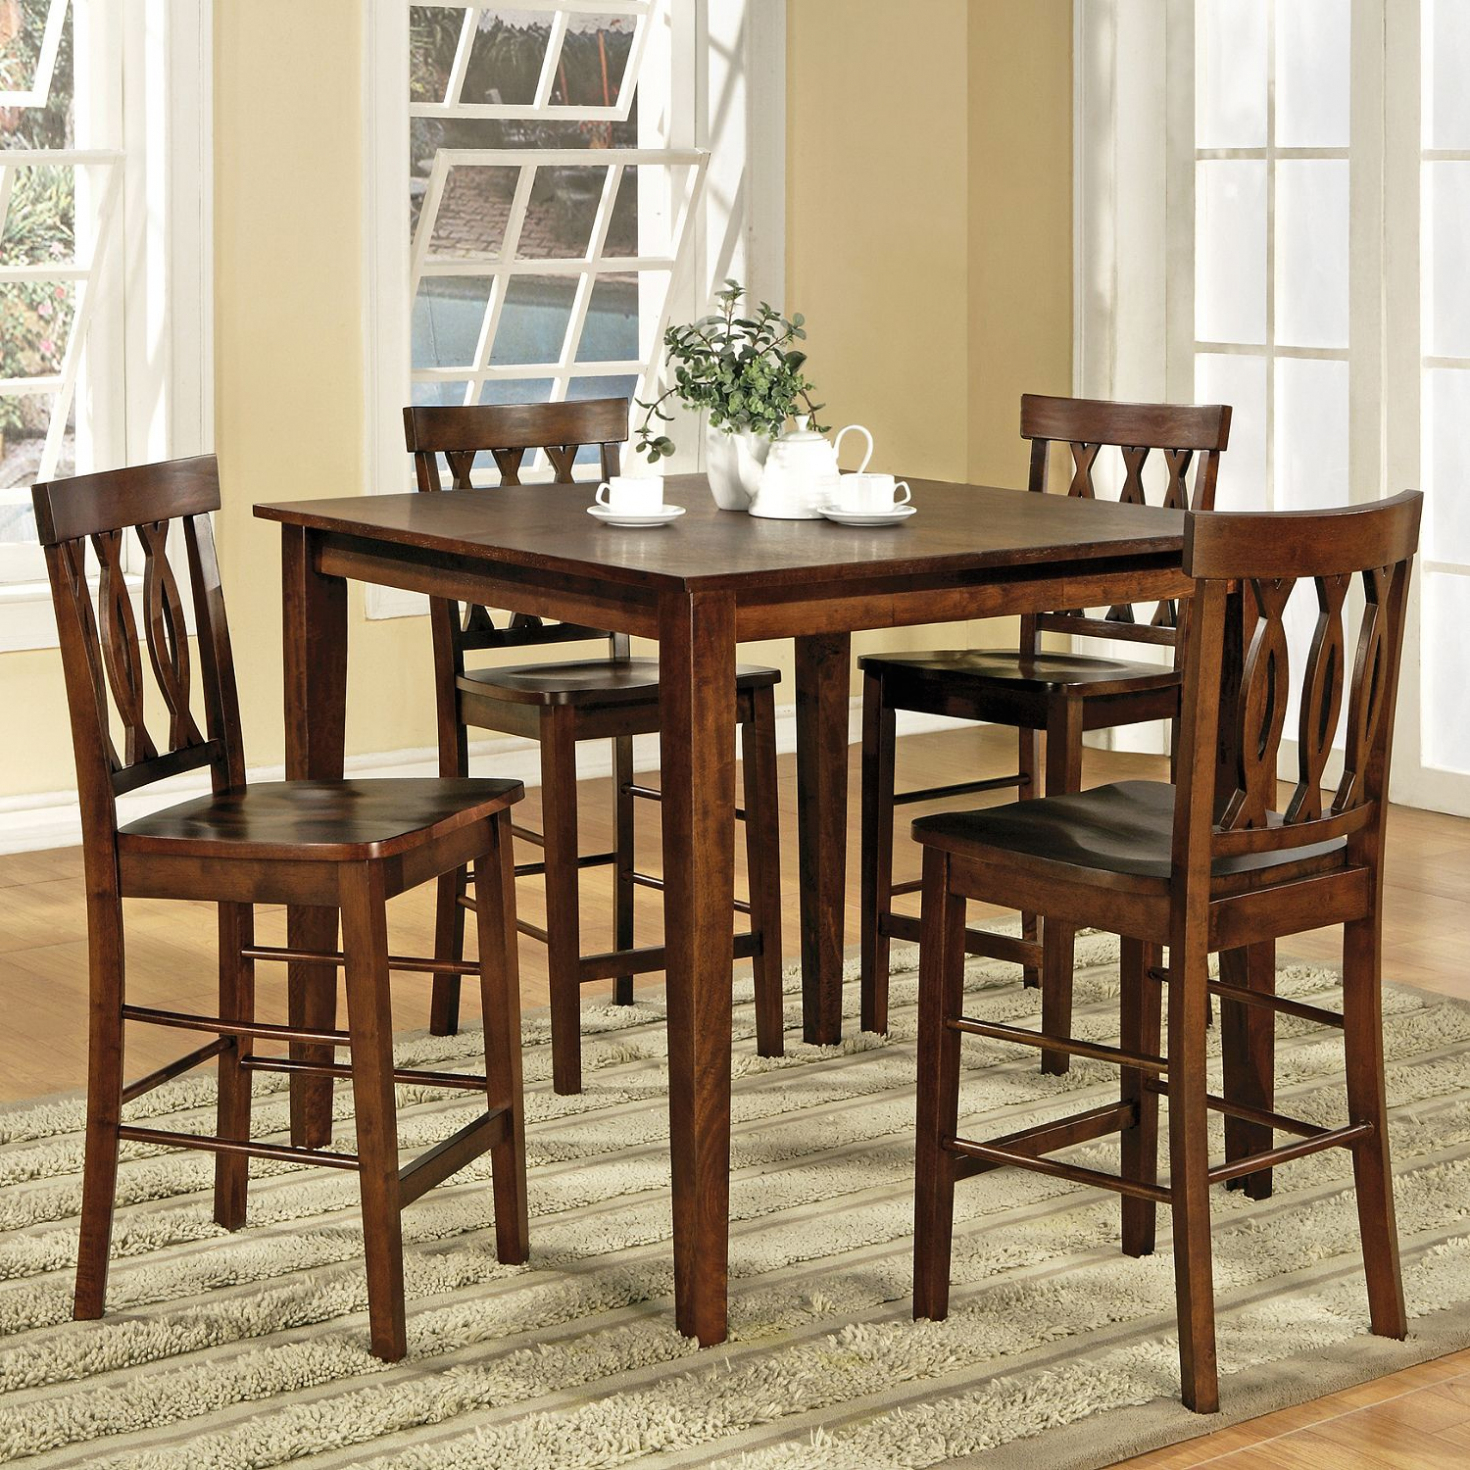 Dining Room Table Sets Under 200 • Faucet Ideas Site